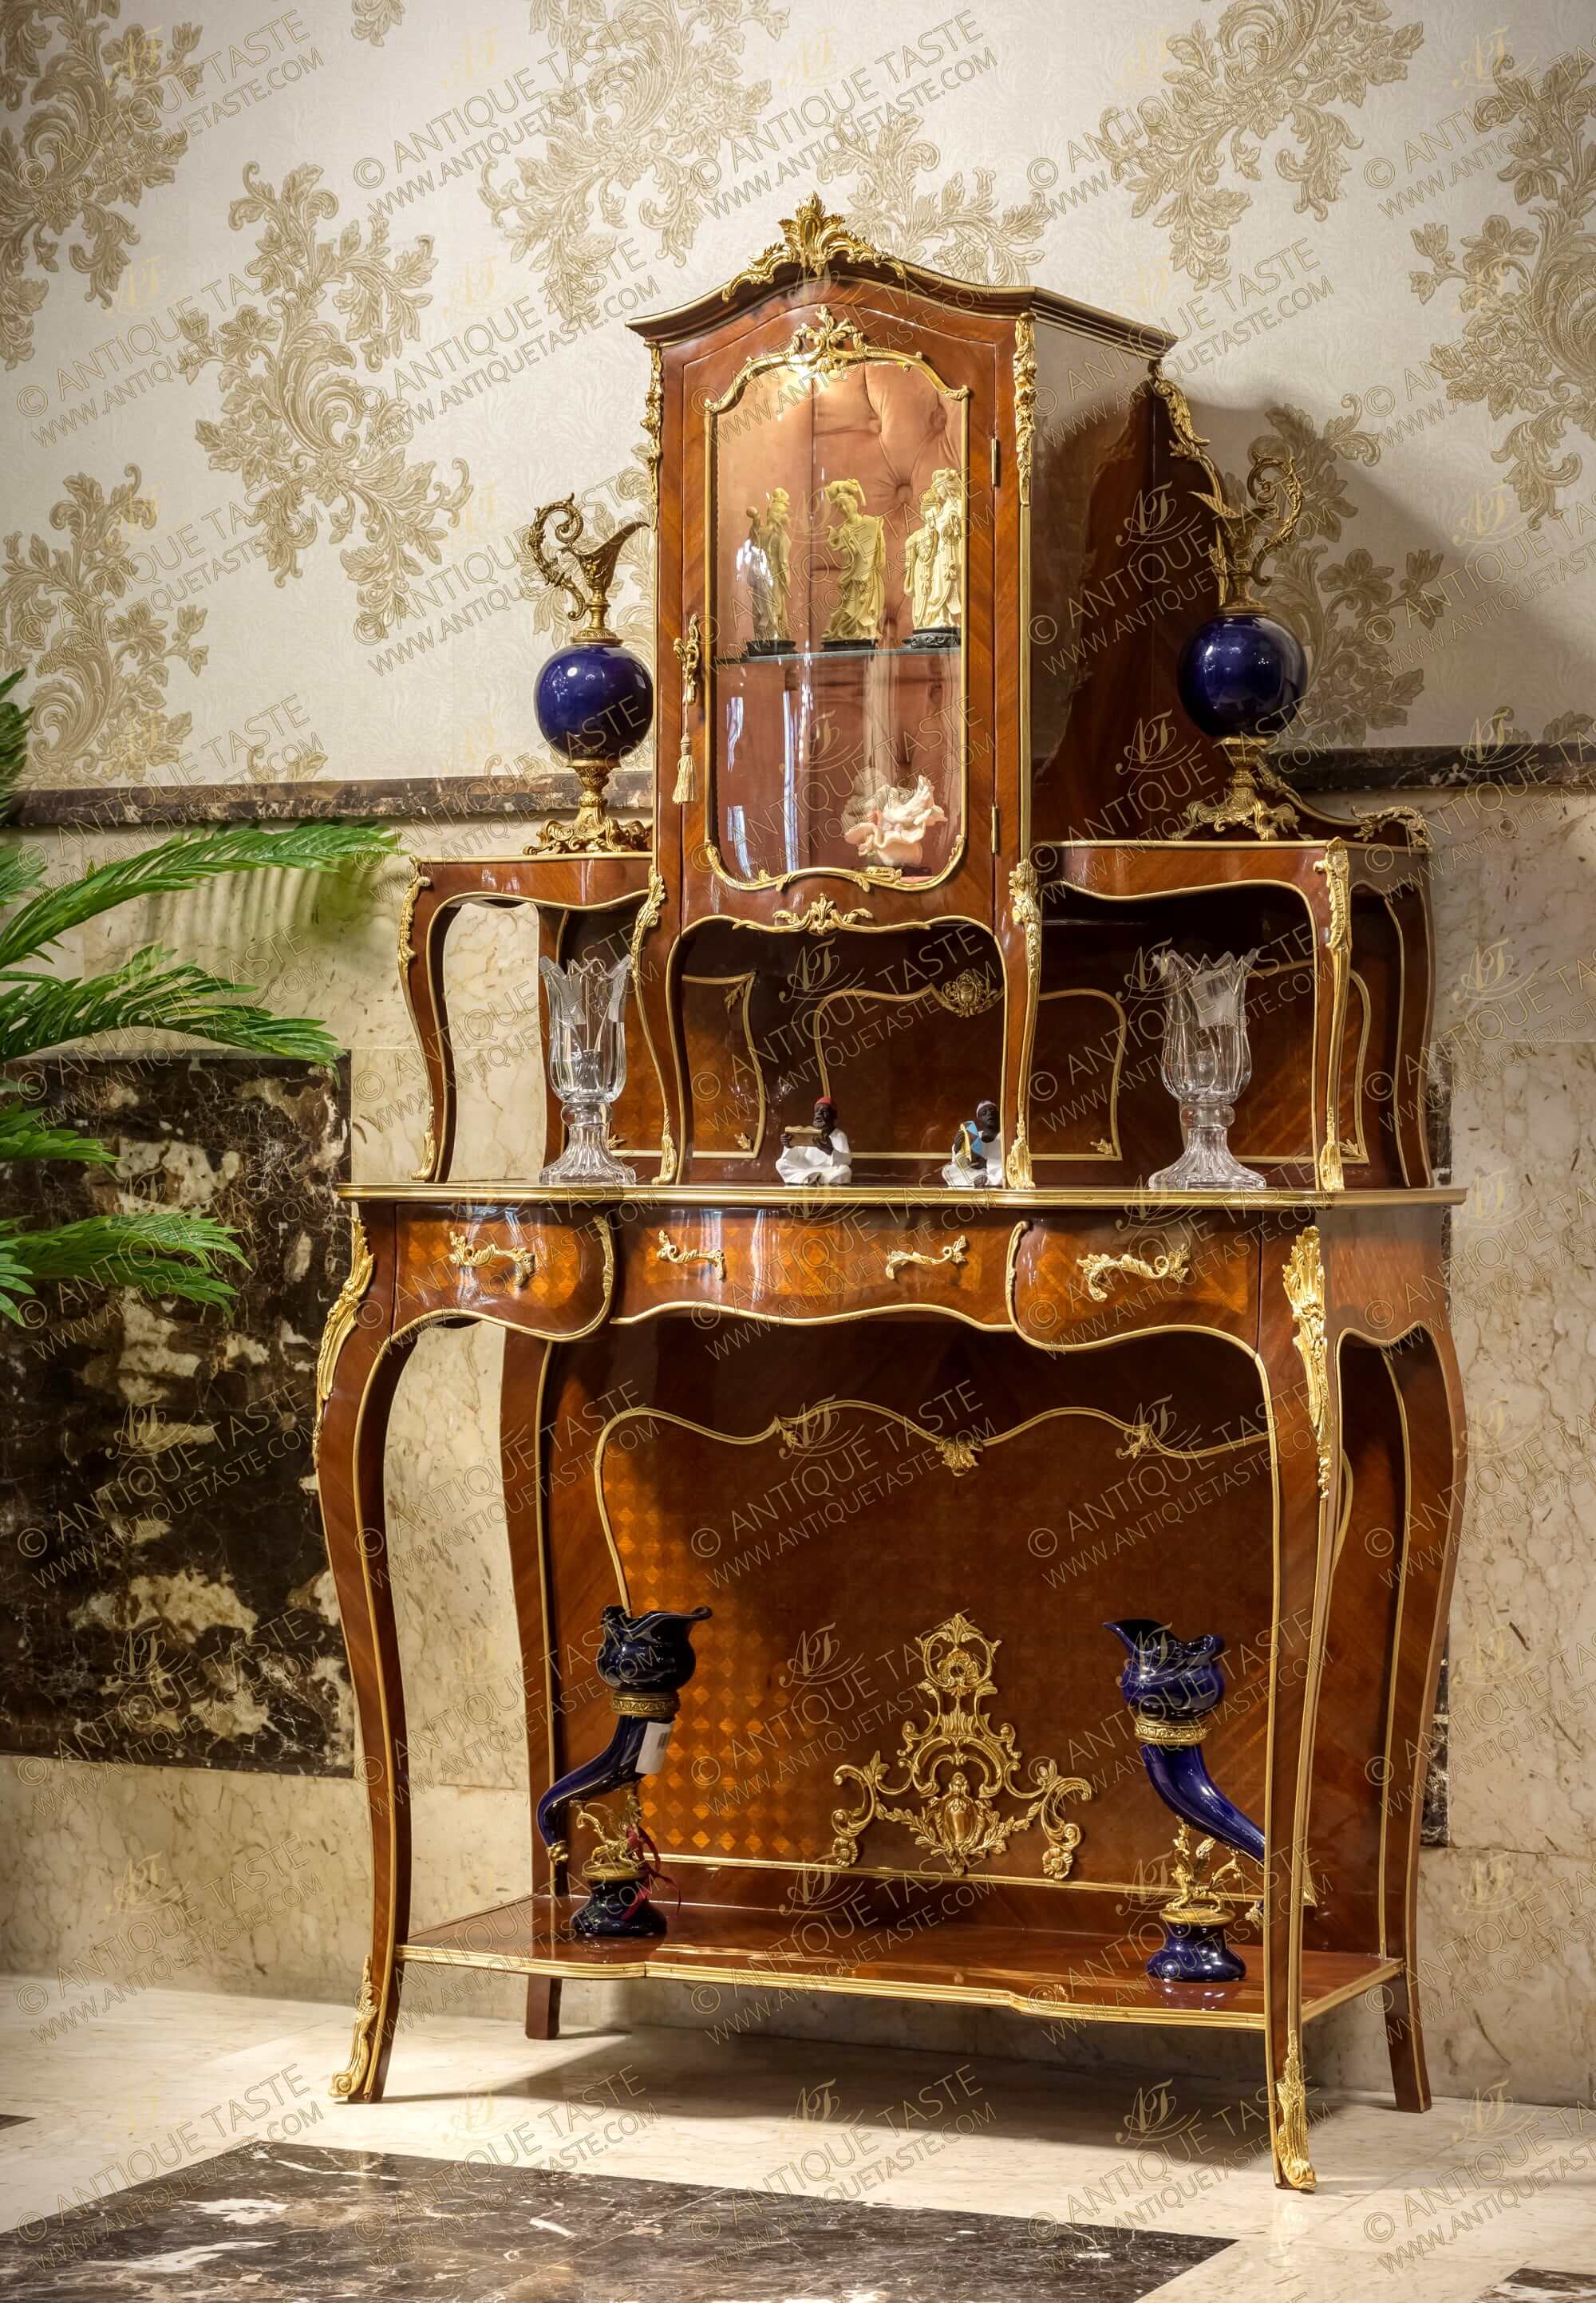 A stunning Louis XV style ormolu-mounted veneer inlaid and parquetry Two Tier Royal Console De Desserte and Vitrine Cabinet after the model by Francois Linke upholstered with tufted velvet and adorned with ormolu Rococo elements and foliate ormolu filet to the contour; with three central drawers and bombe glass door and lower shelf connecting the cabriole legs